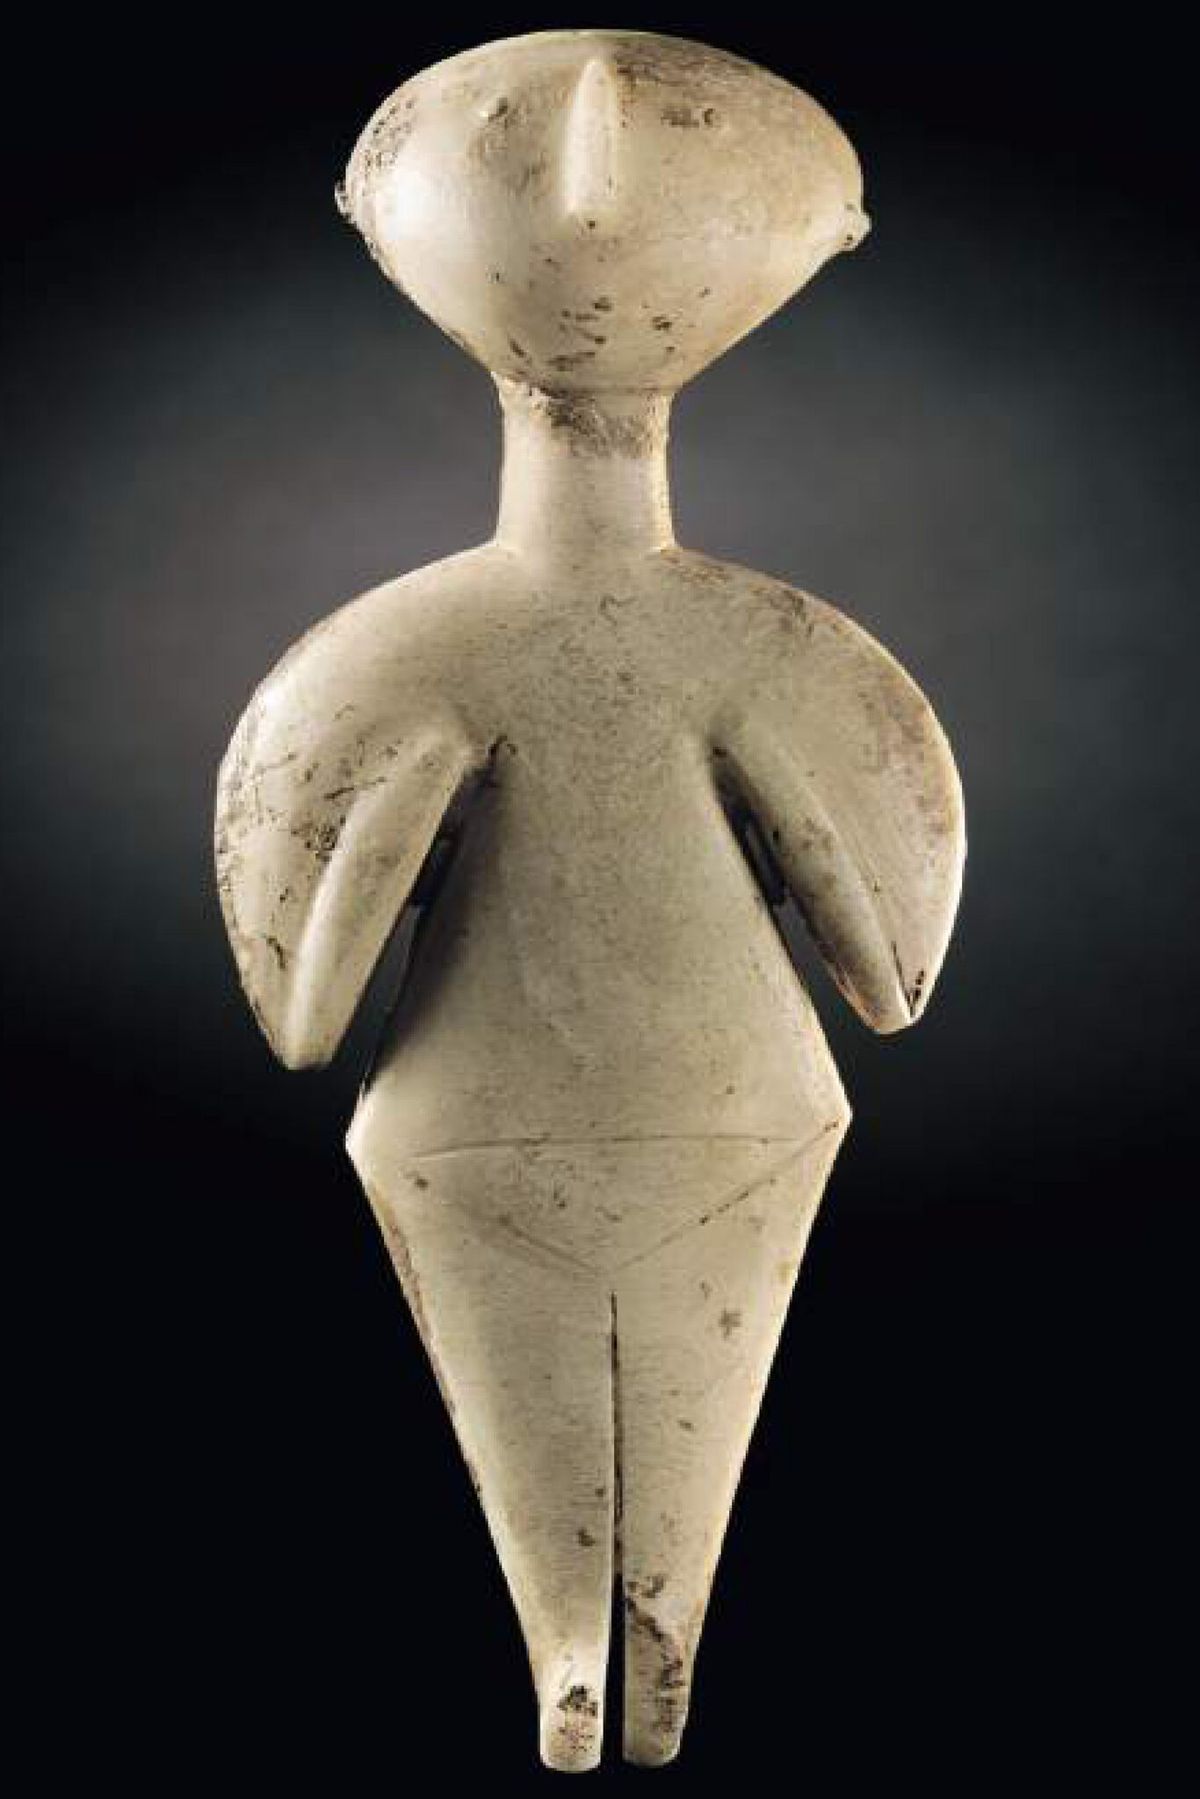 The Guennol Stargazer was created in what is now Turkey’s Manisa Province more than 6,000 years ago 